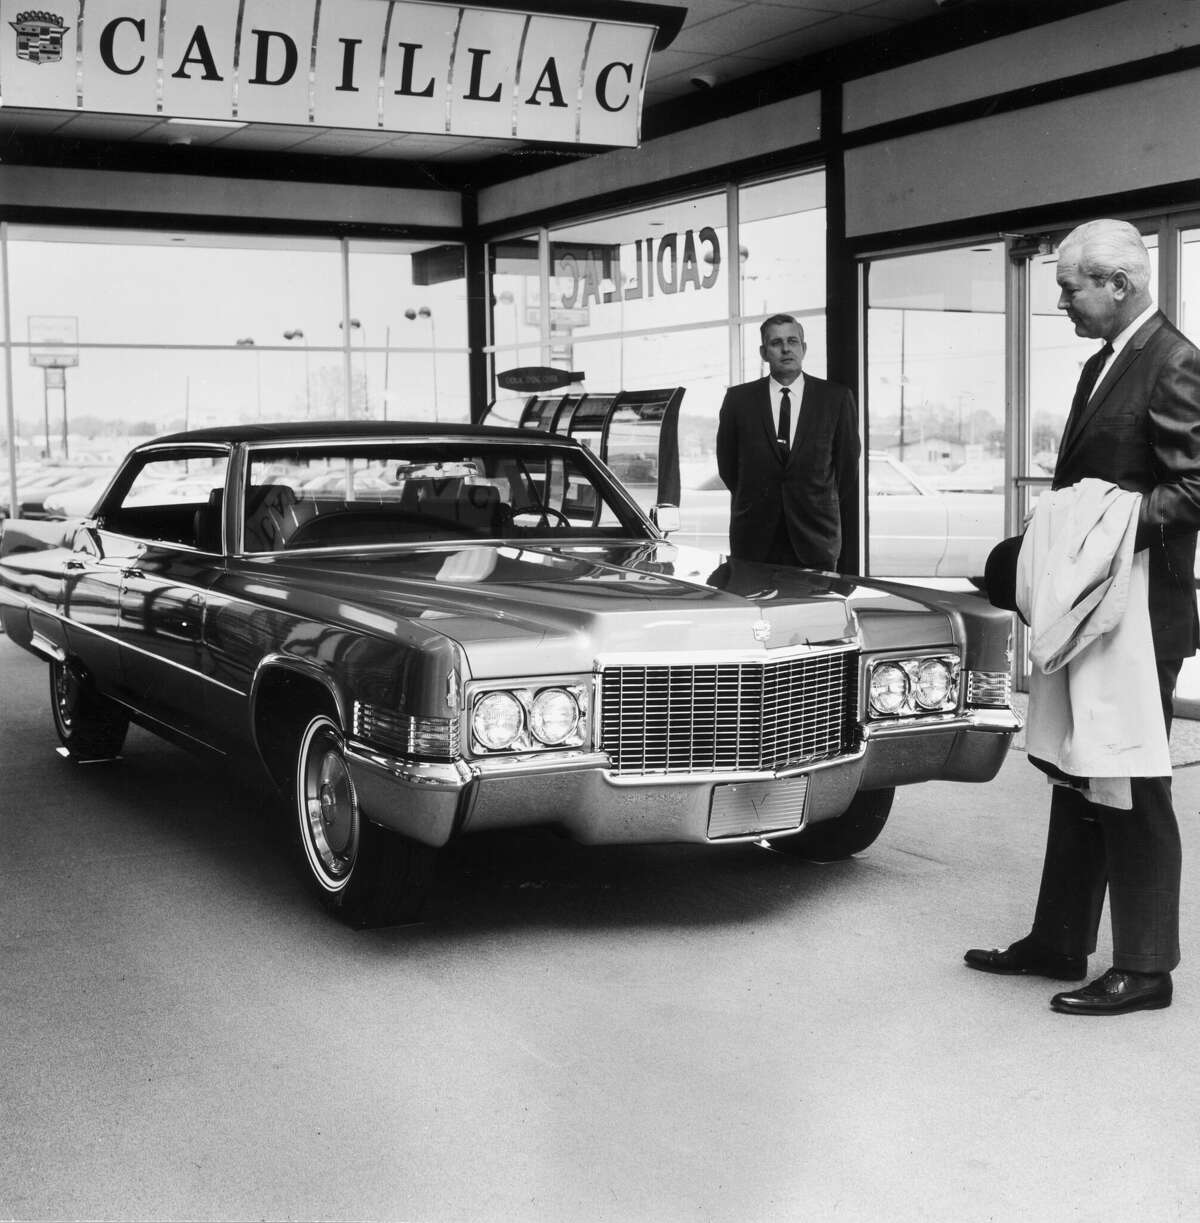 A man looks at a new Cadillac sedan in a showroom, as a car salesman looks on, early 1970s. (Photo by Hulton Archive/Getty Images)